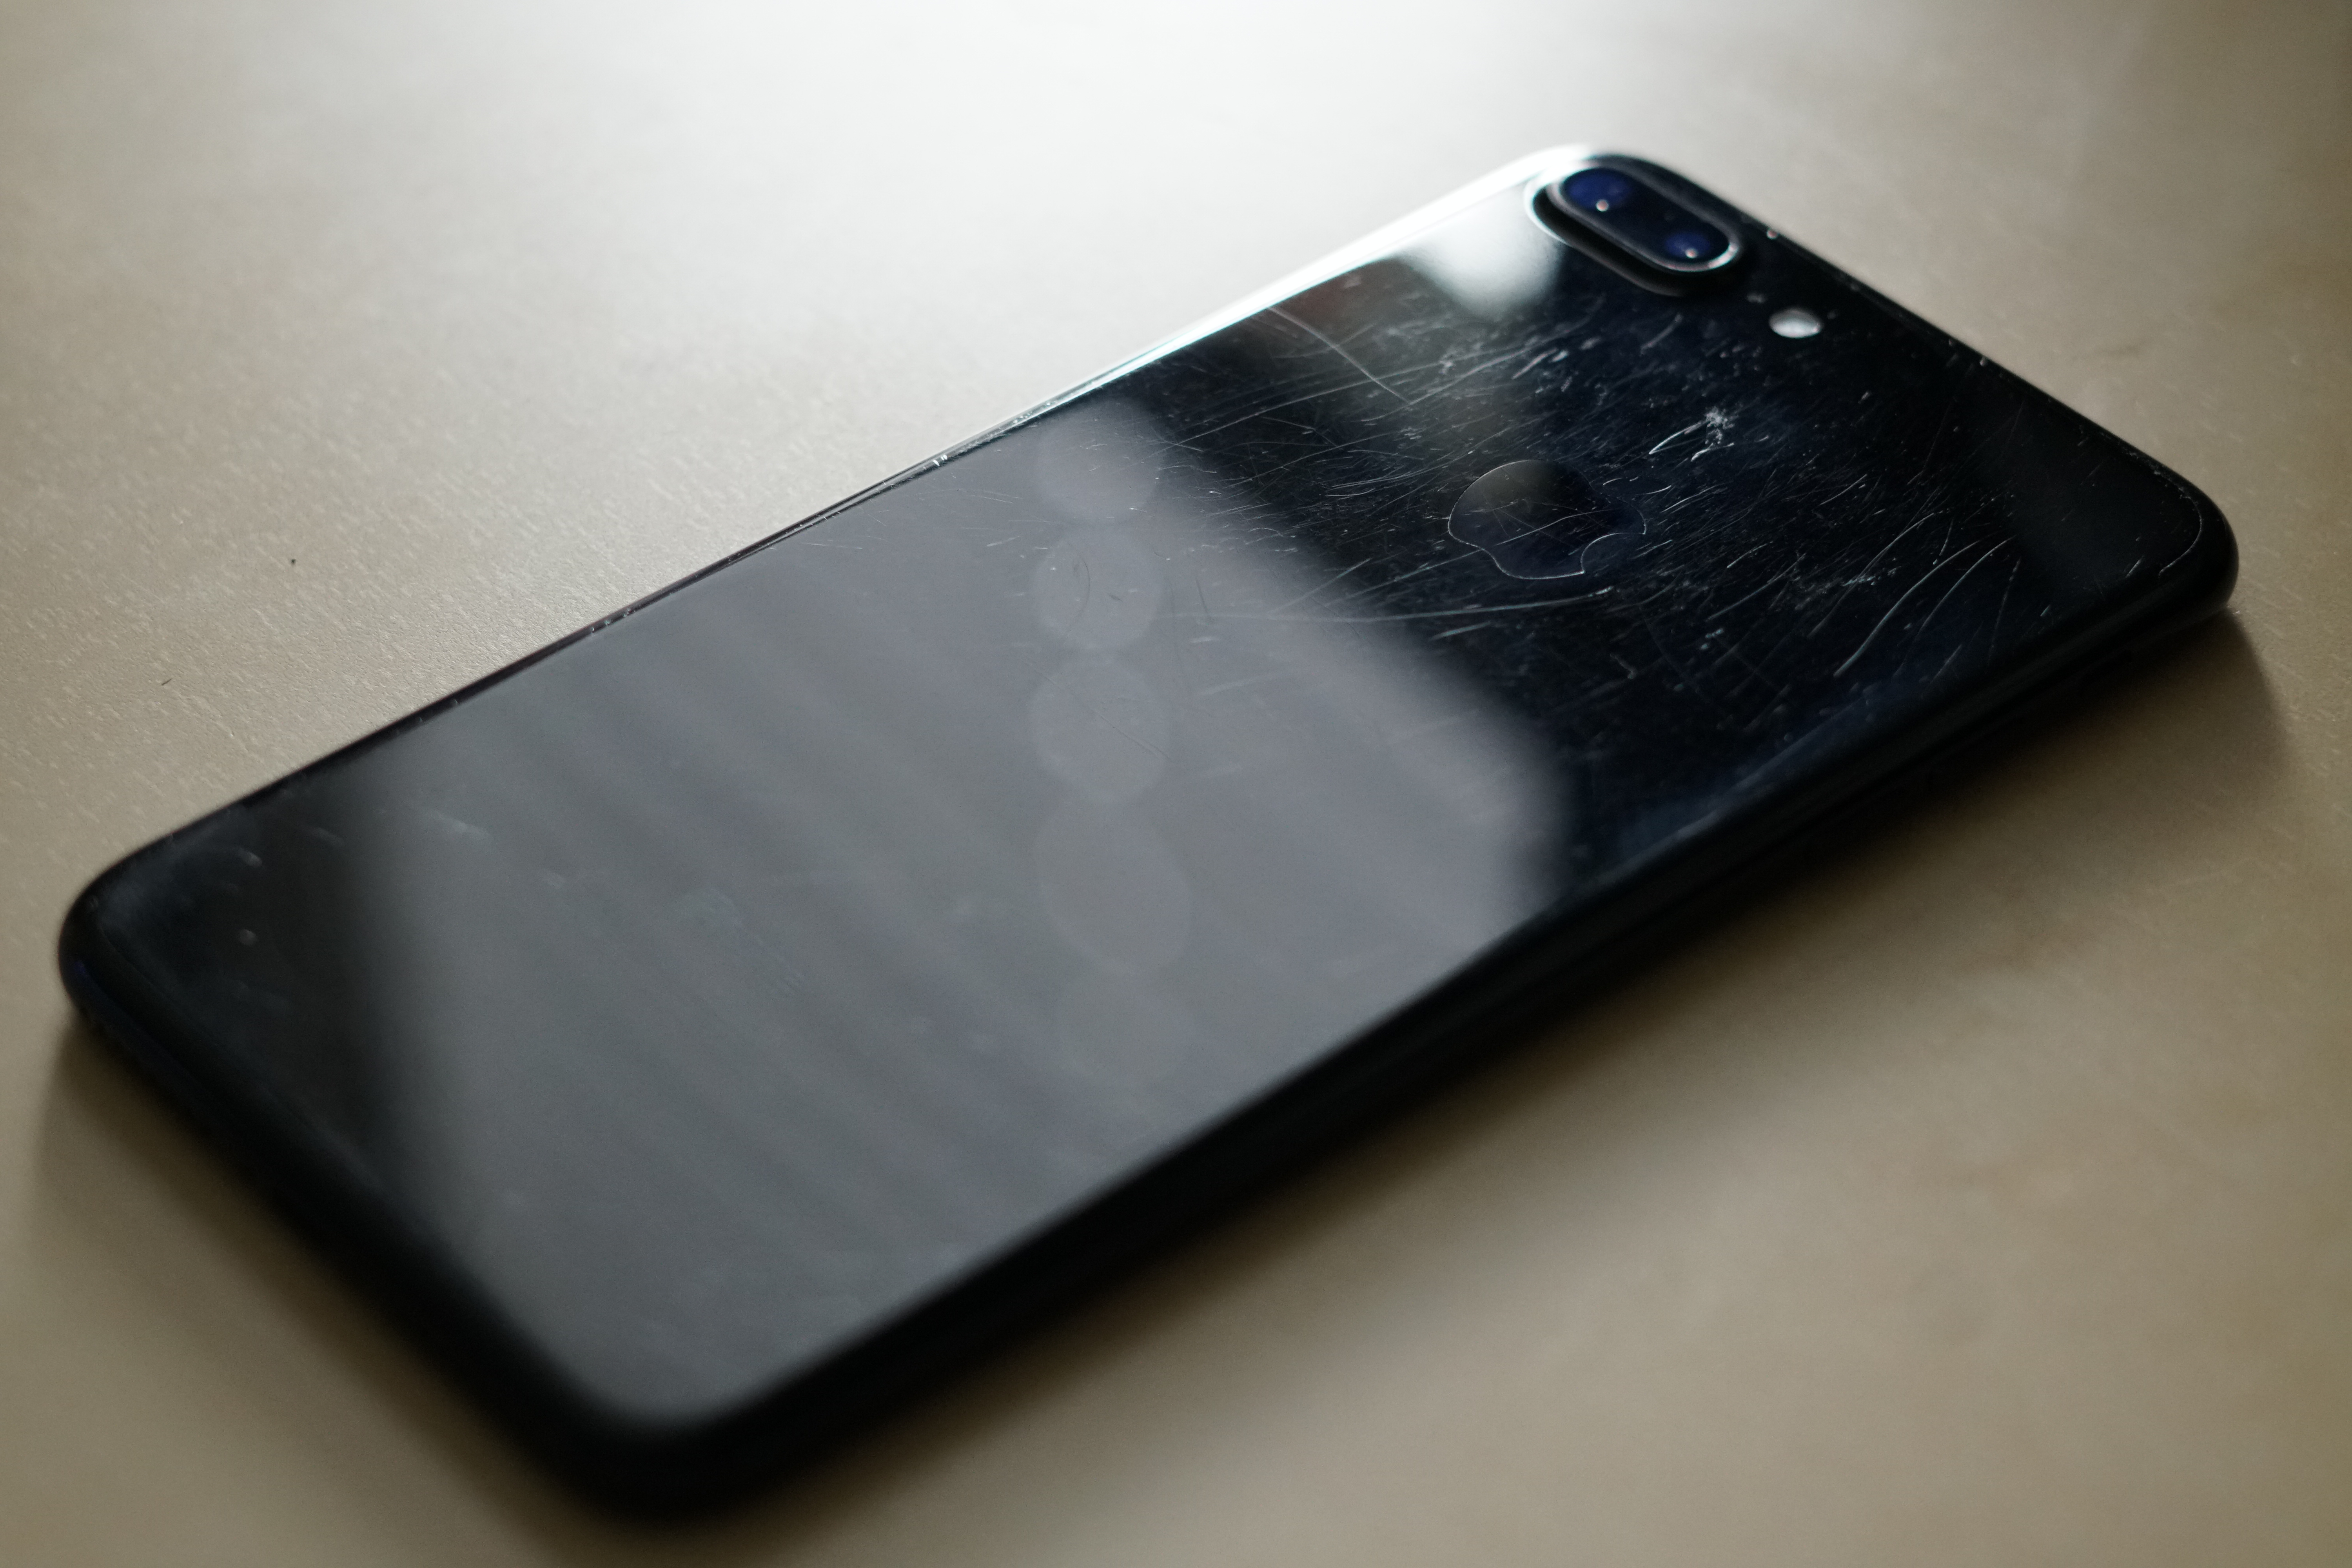 Here's how the jet black iPhone's 'fine micro-abrasions